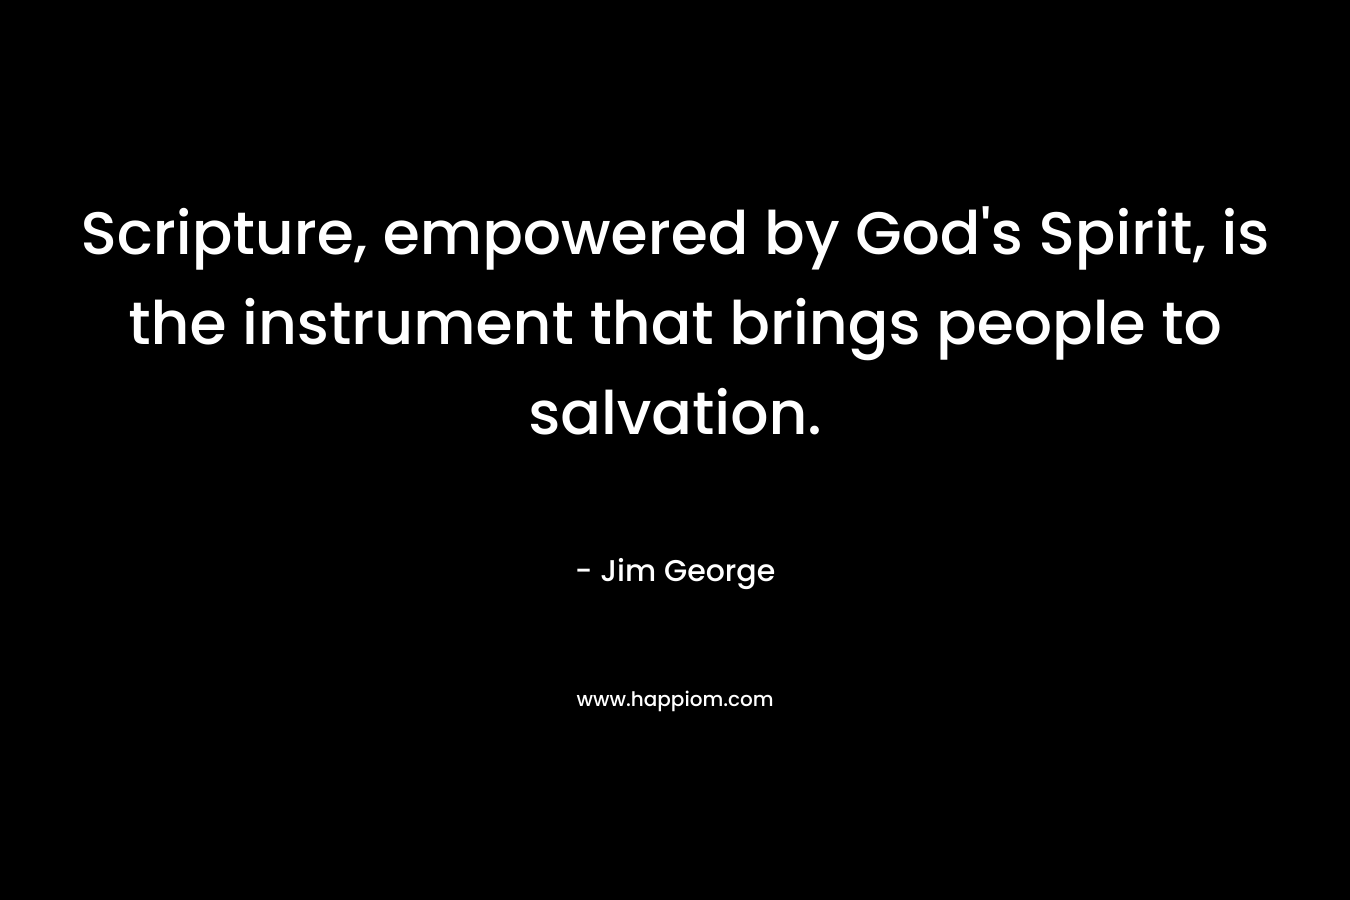 Scripture, empowered by God’s Spirit, is the instrument that brings people to salvation. – Jim George